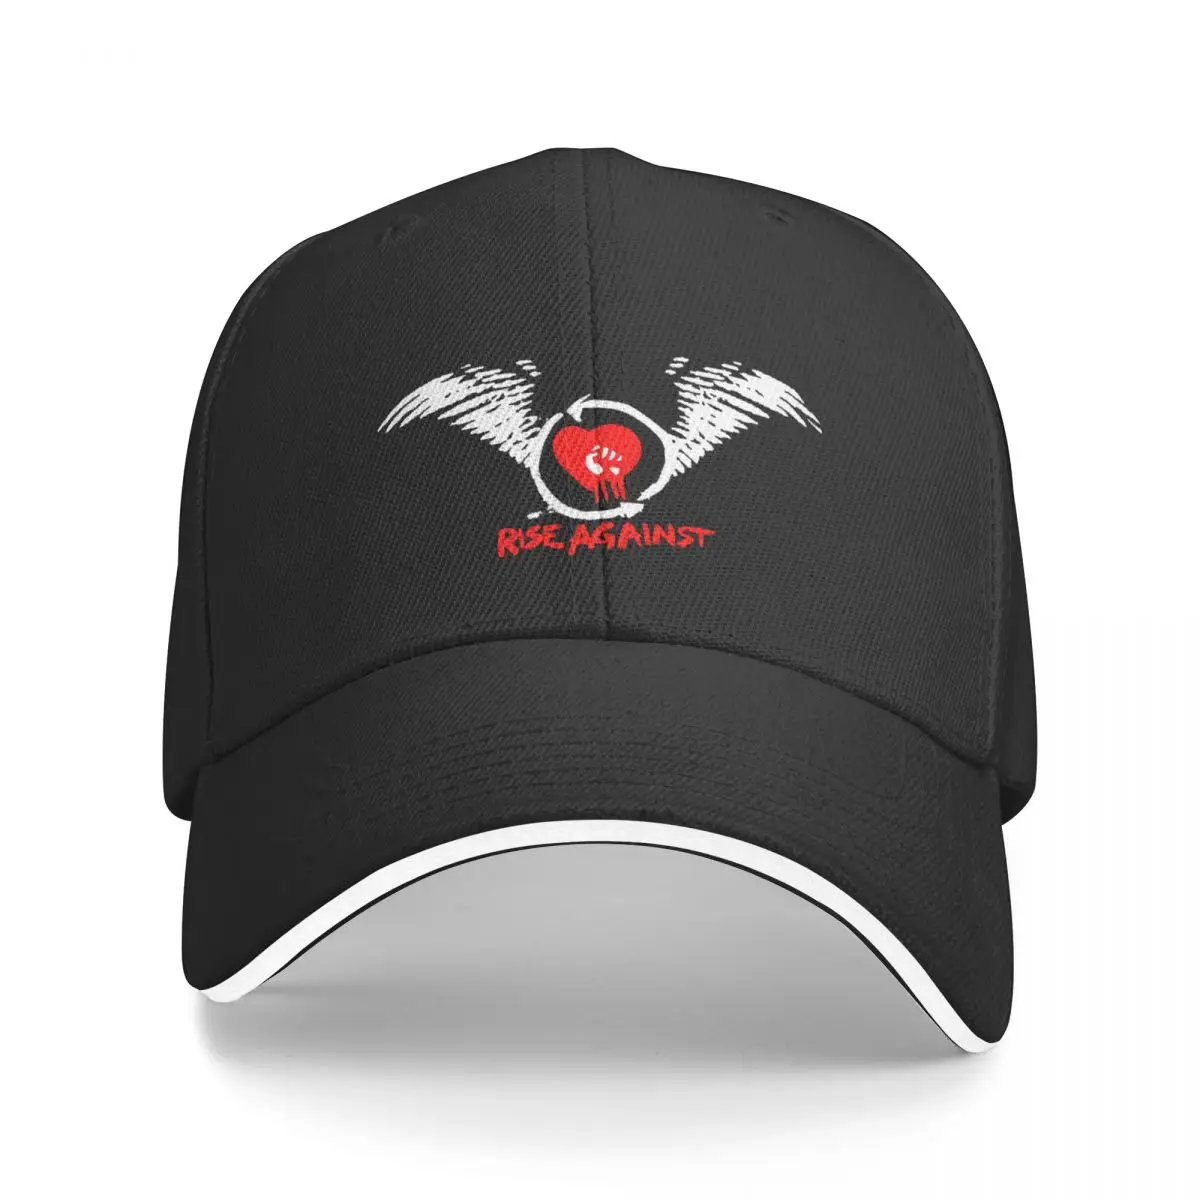 

New Popular by rise against Genres Melodic hardcore, punk rock 99sp Baseball Cap Beach Outing Caps Women Men's